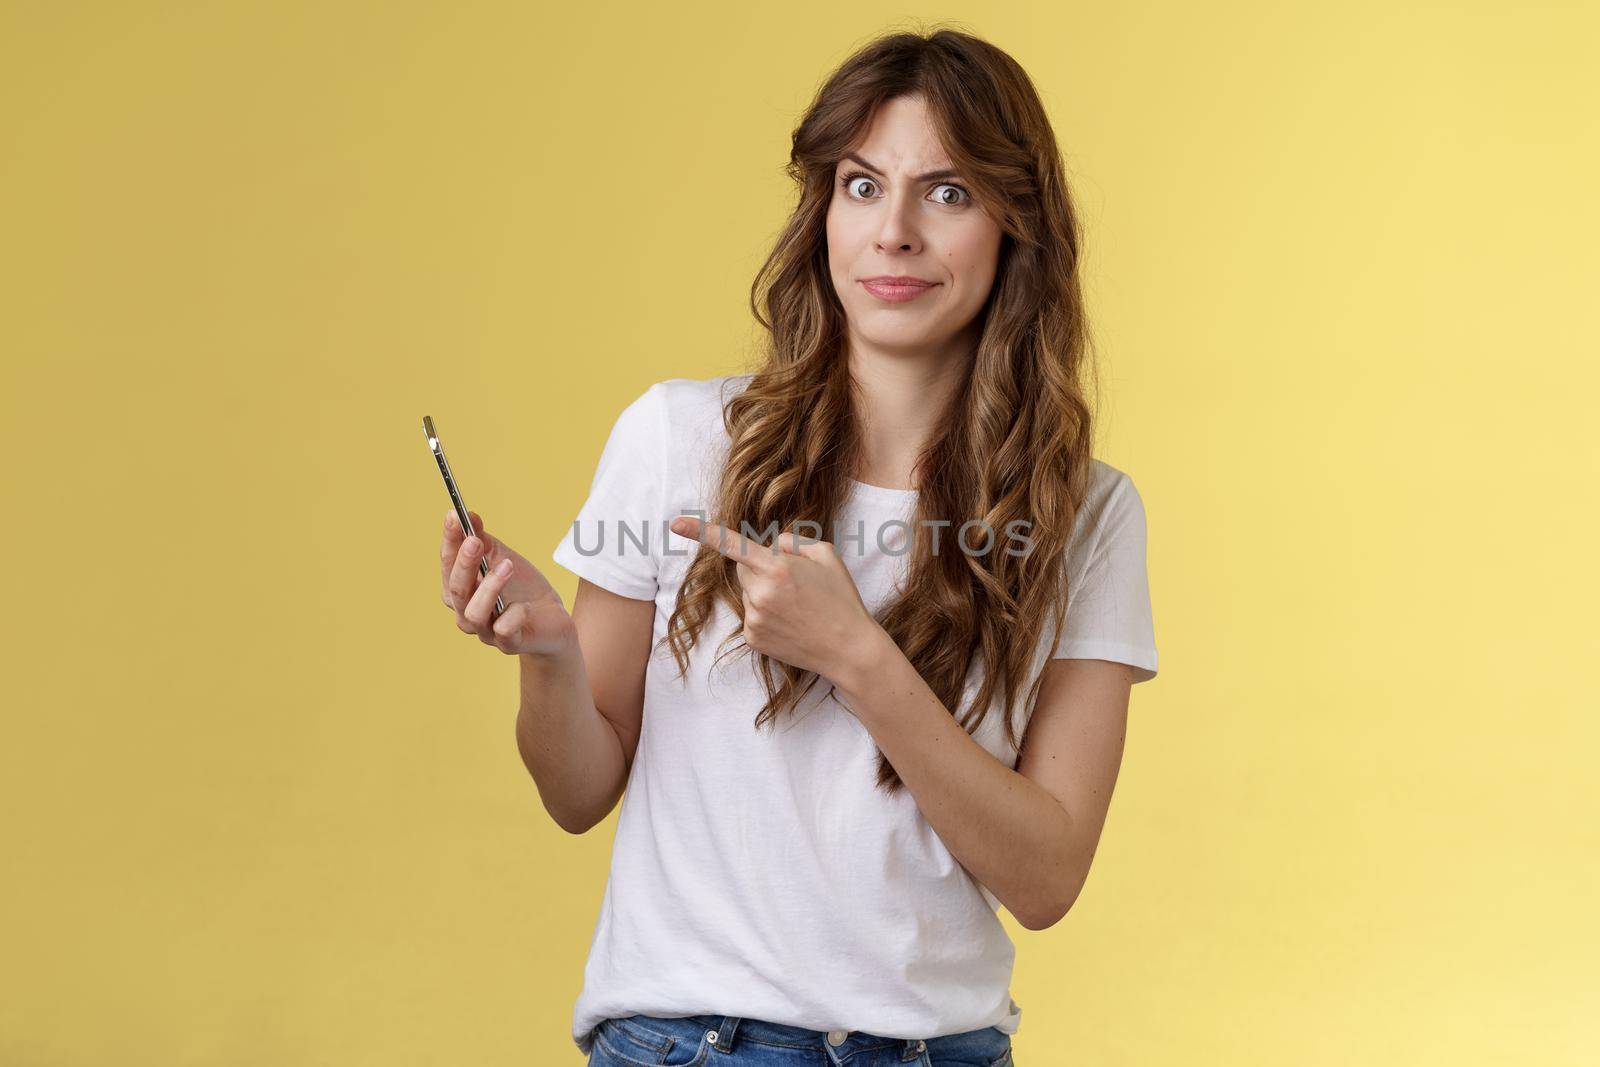 Girl answers strange weird call receive crazy upsetting message cringe doubtful displeased smirking dismay pointing suspicious smartphone stand yellow background intense frustrated by Benzoix